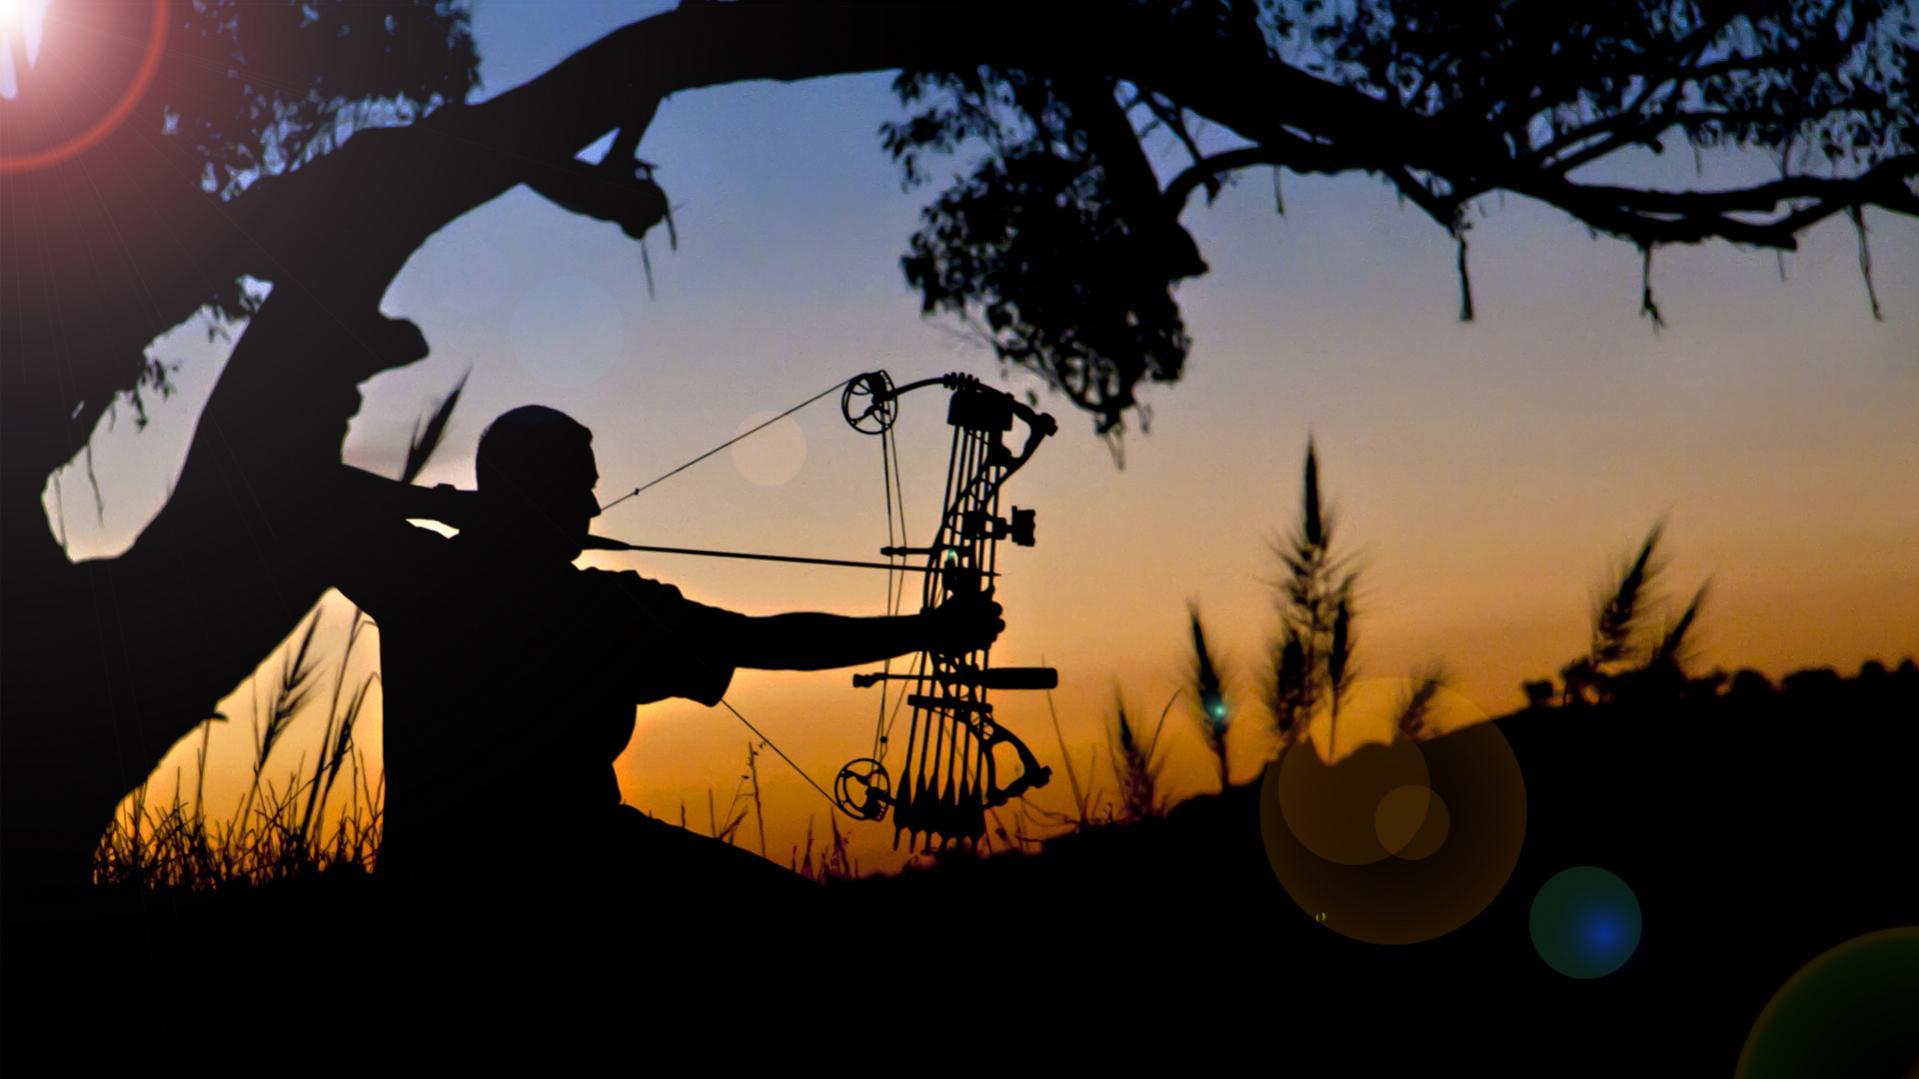 Hoyt Bow Hunting Wallpaper Galleryhip The